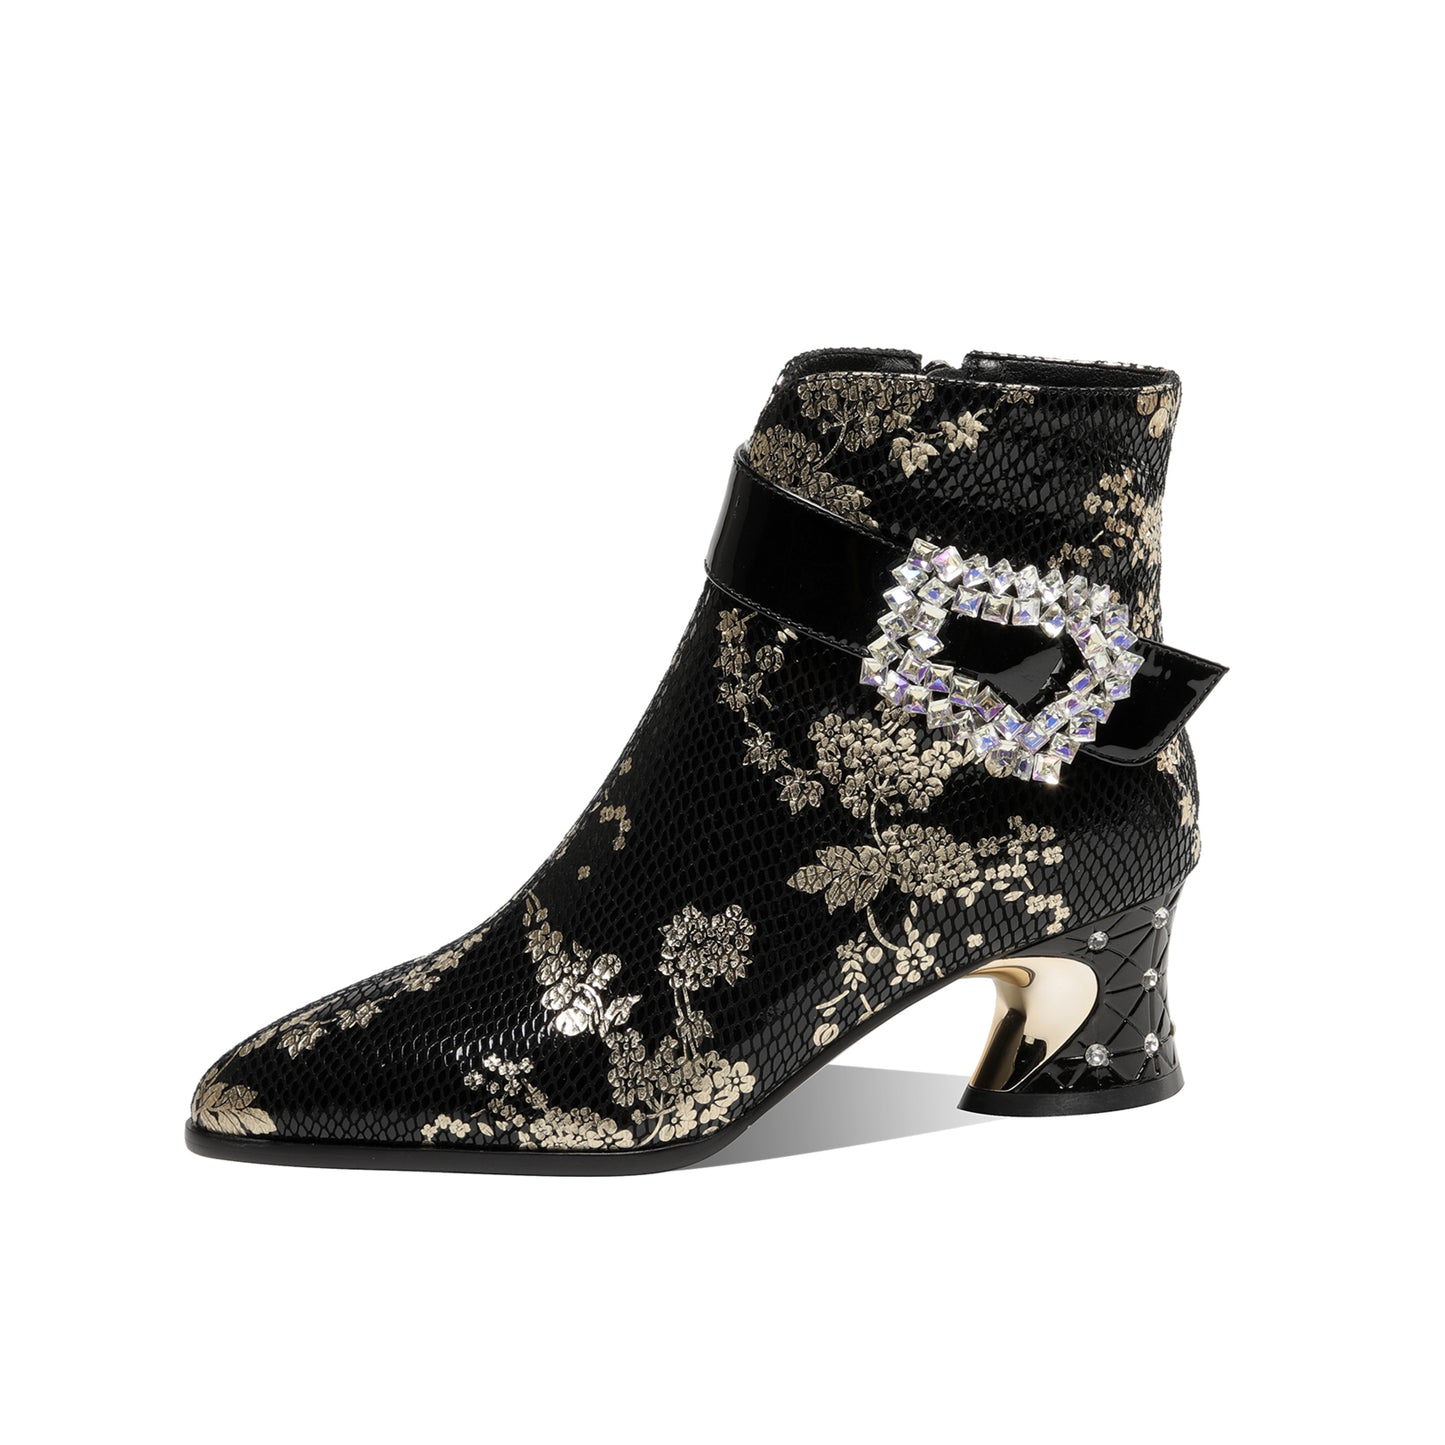 TinaCus Women's Rhinestone Buckle Pointed Toe Genuine Leather Handmade Mid Heel Side Zip Floral Ankle Boots